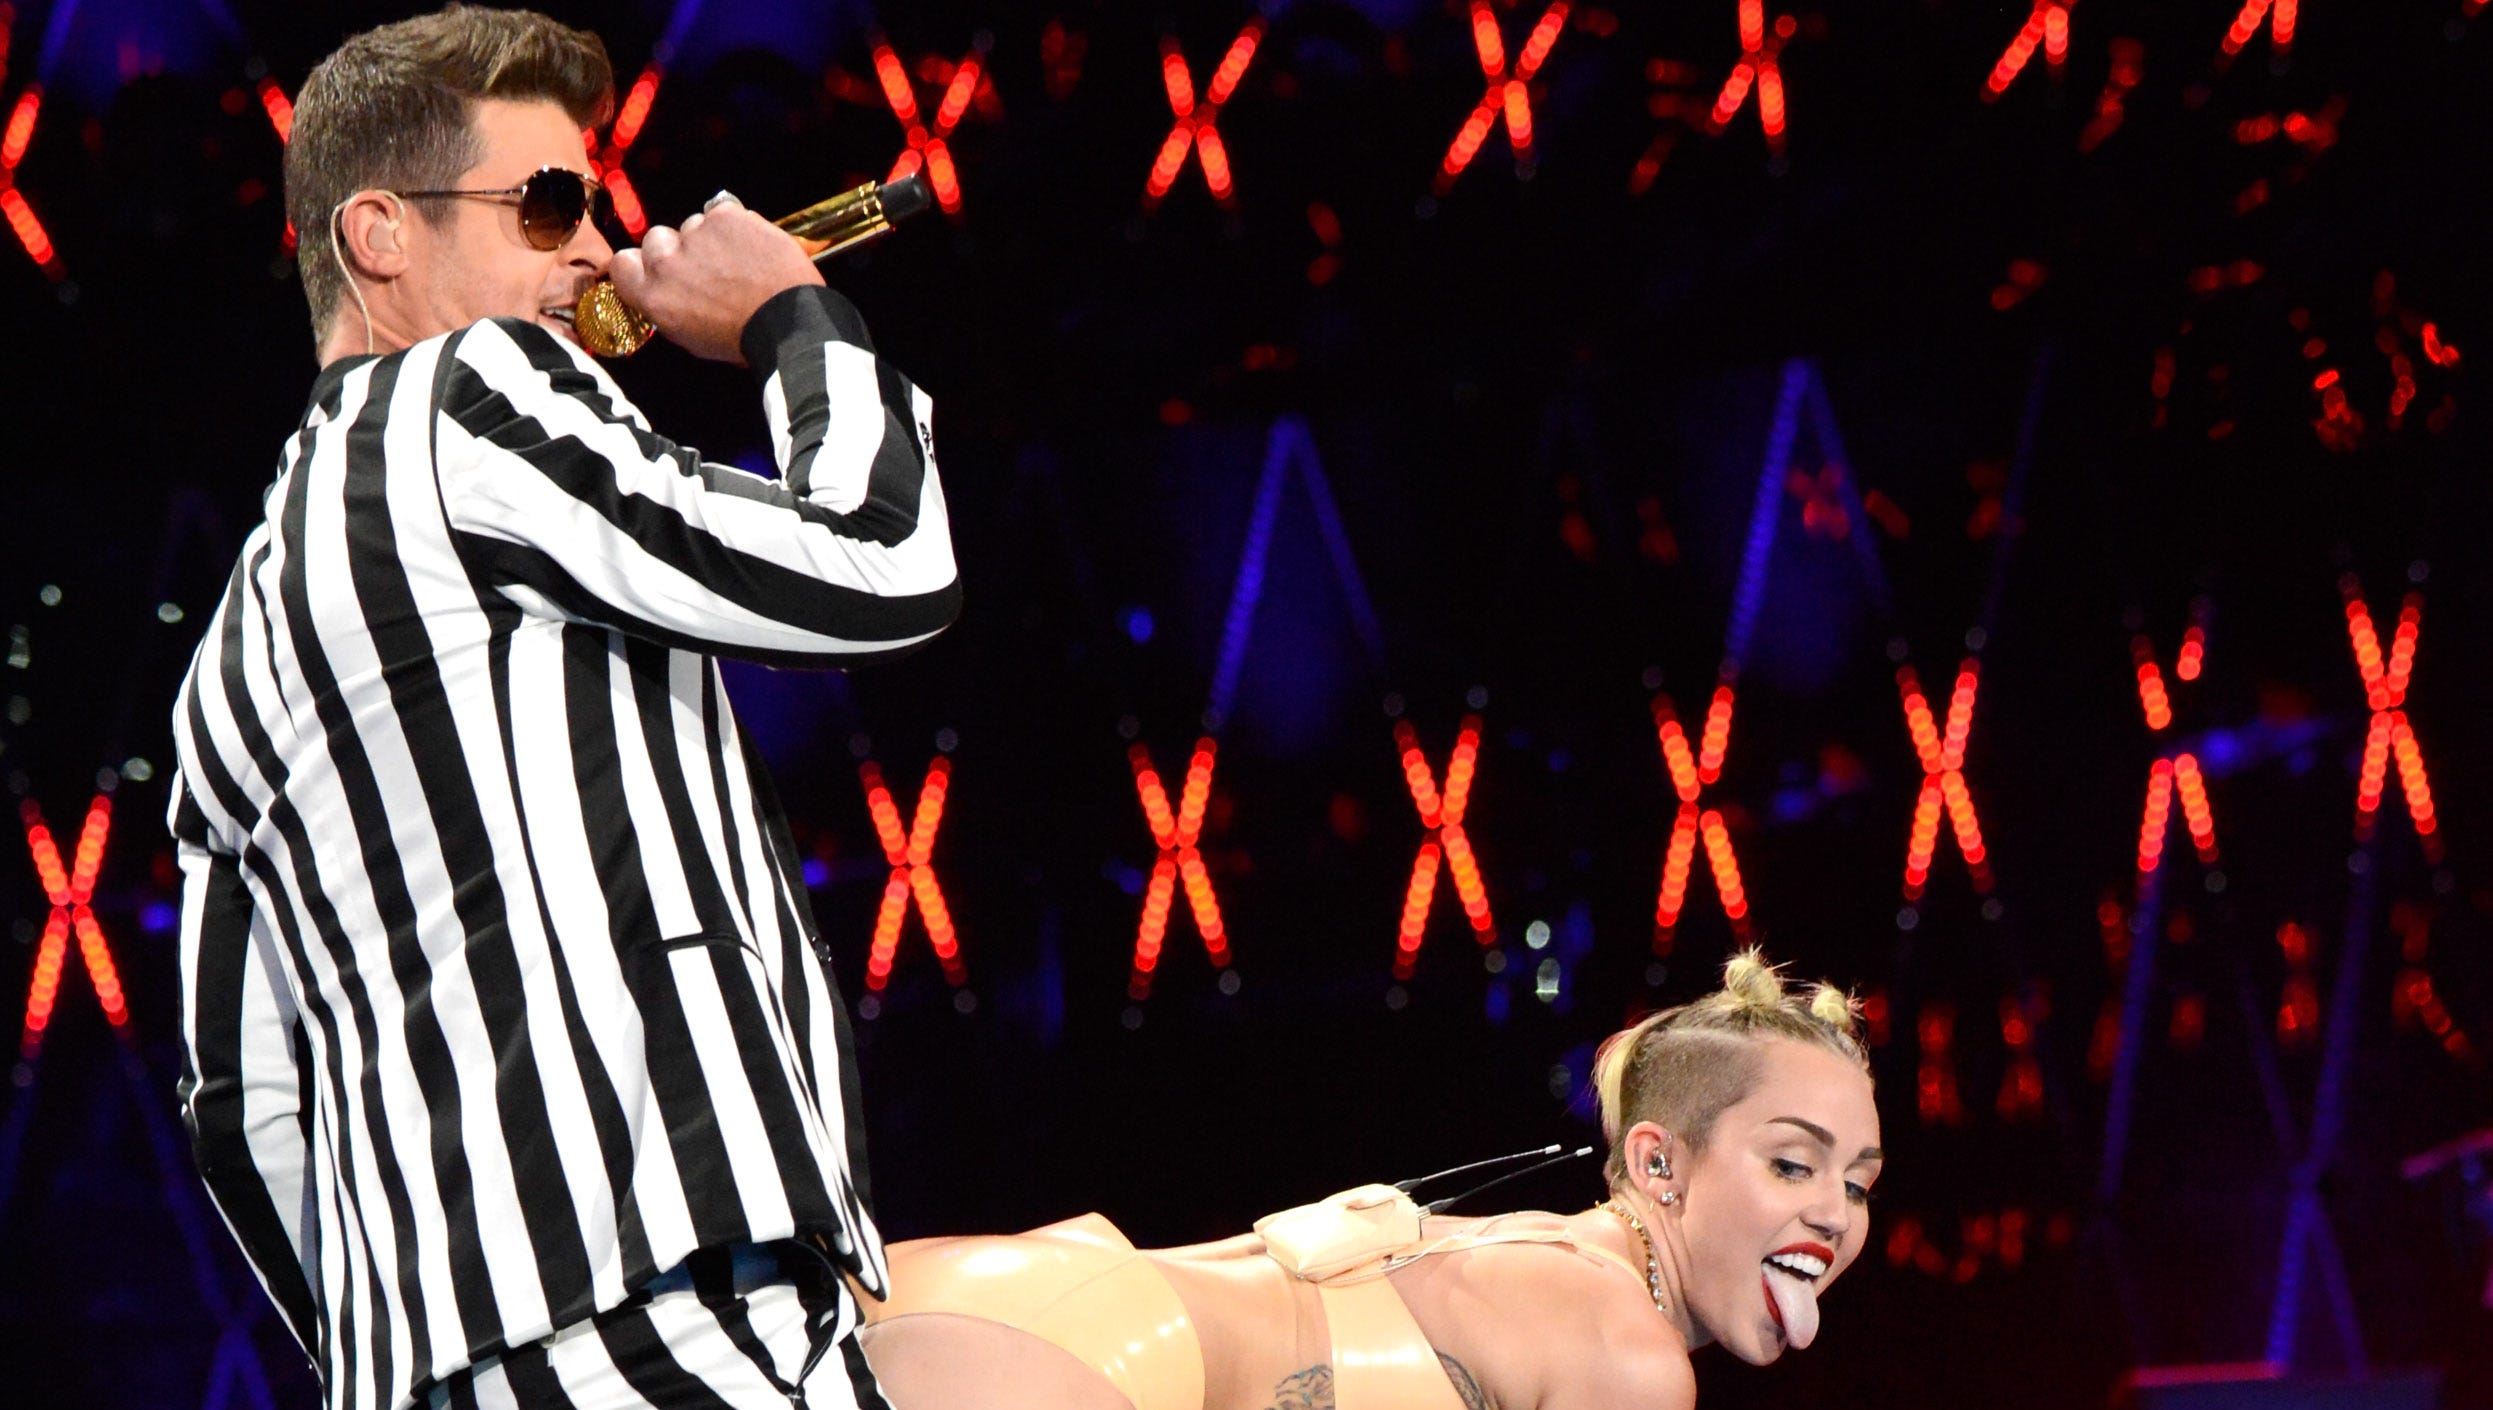 Molly Cyrus Porn - Miley Cyrus twerks, gets freaky with Robin Thicke